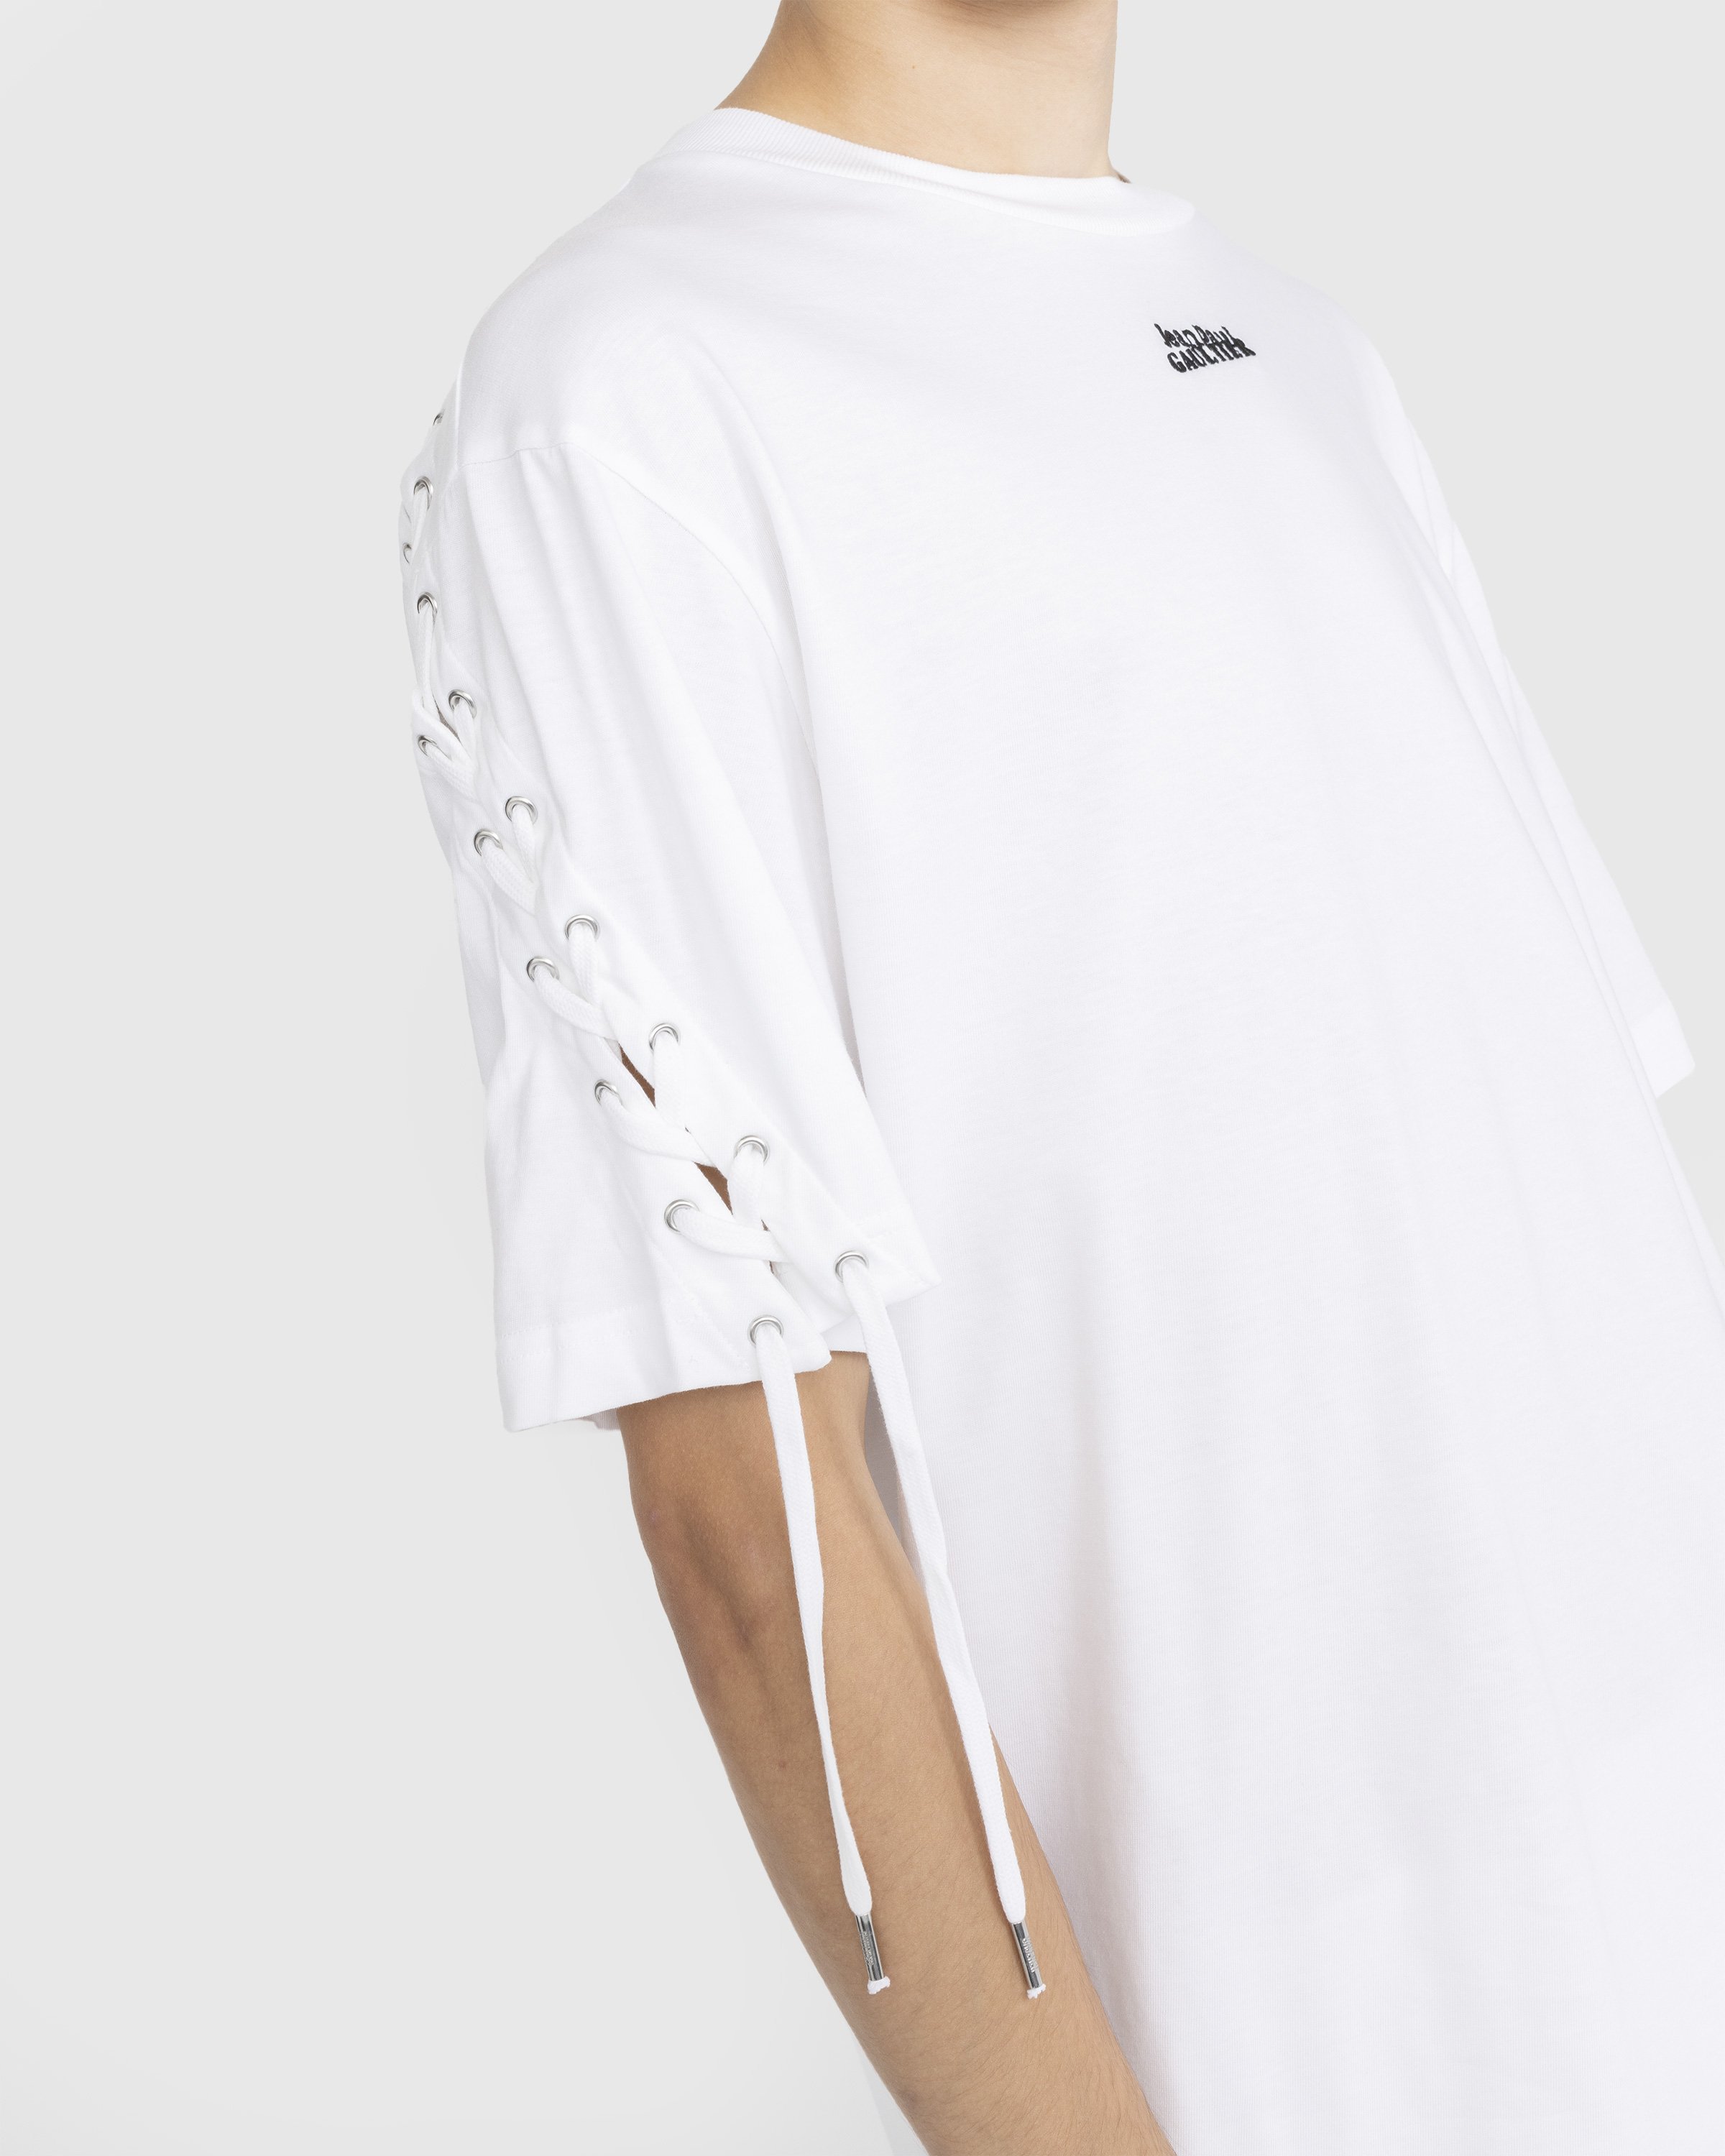 Jean Paul Gaultier - Oversize Laced T-Shirt White - Clothing - White - Image 4